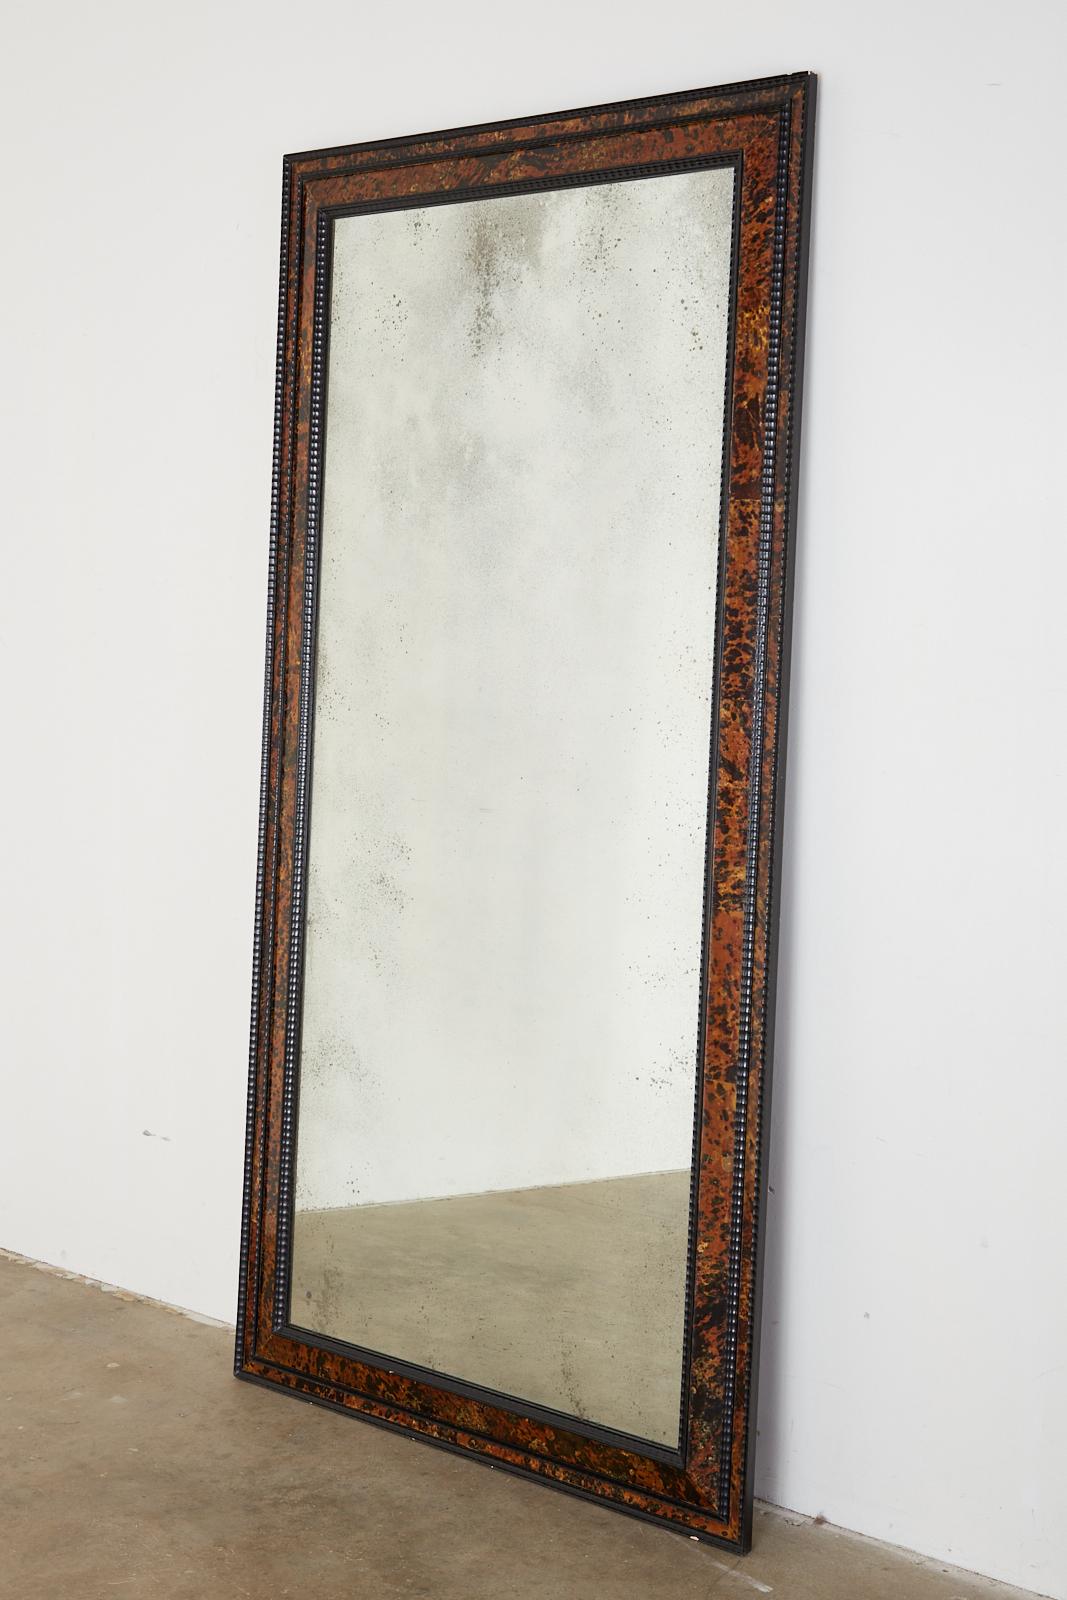 Fantastic faux tortoiseshell veneered floor mirror made in the Flemish or Dutch Baroque style. Features an exotic ebonized wood ripple frame with an inner and outer border that creates a dramatic look. The glass has an aged appearance of antique